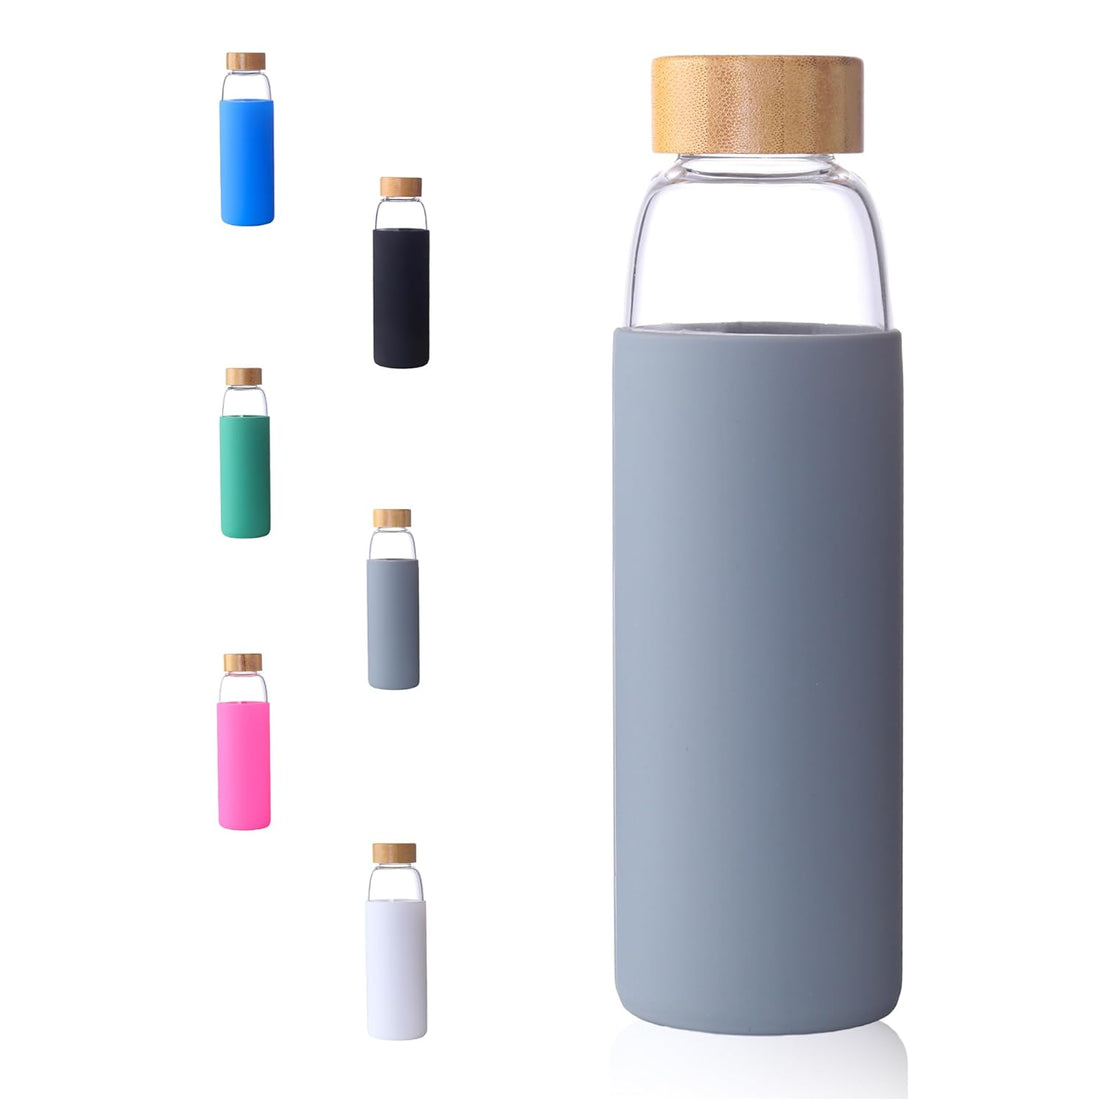 Laster Glass Water Bottle 20 Oz, 600 ml, made of Borosilicate Glass, 1 Bamboo & 1 Stainless Steel Lid, BPA Free, Non-Slip Silicone Sleeve (Grey)